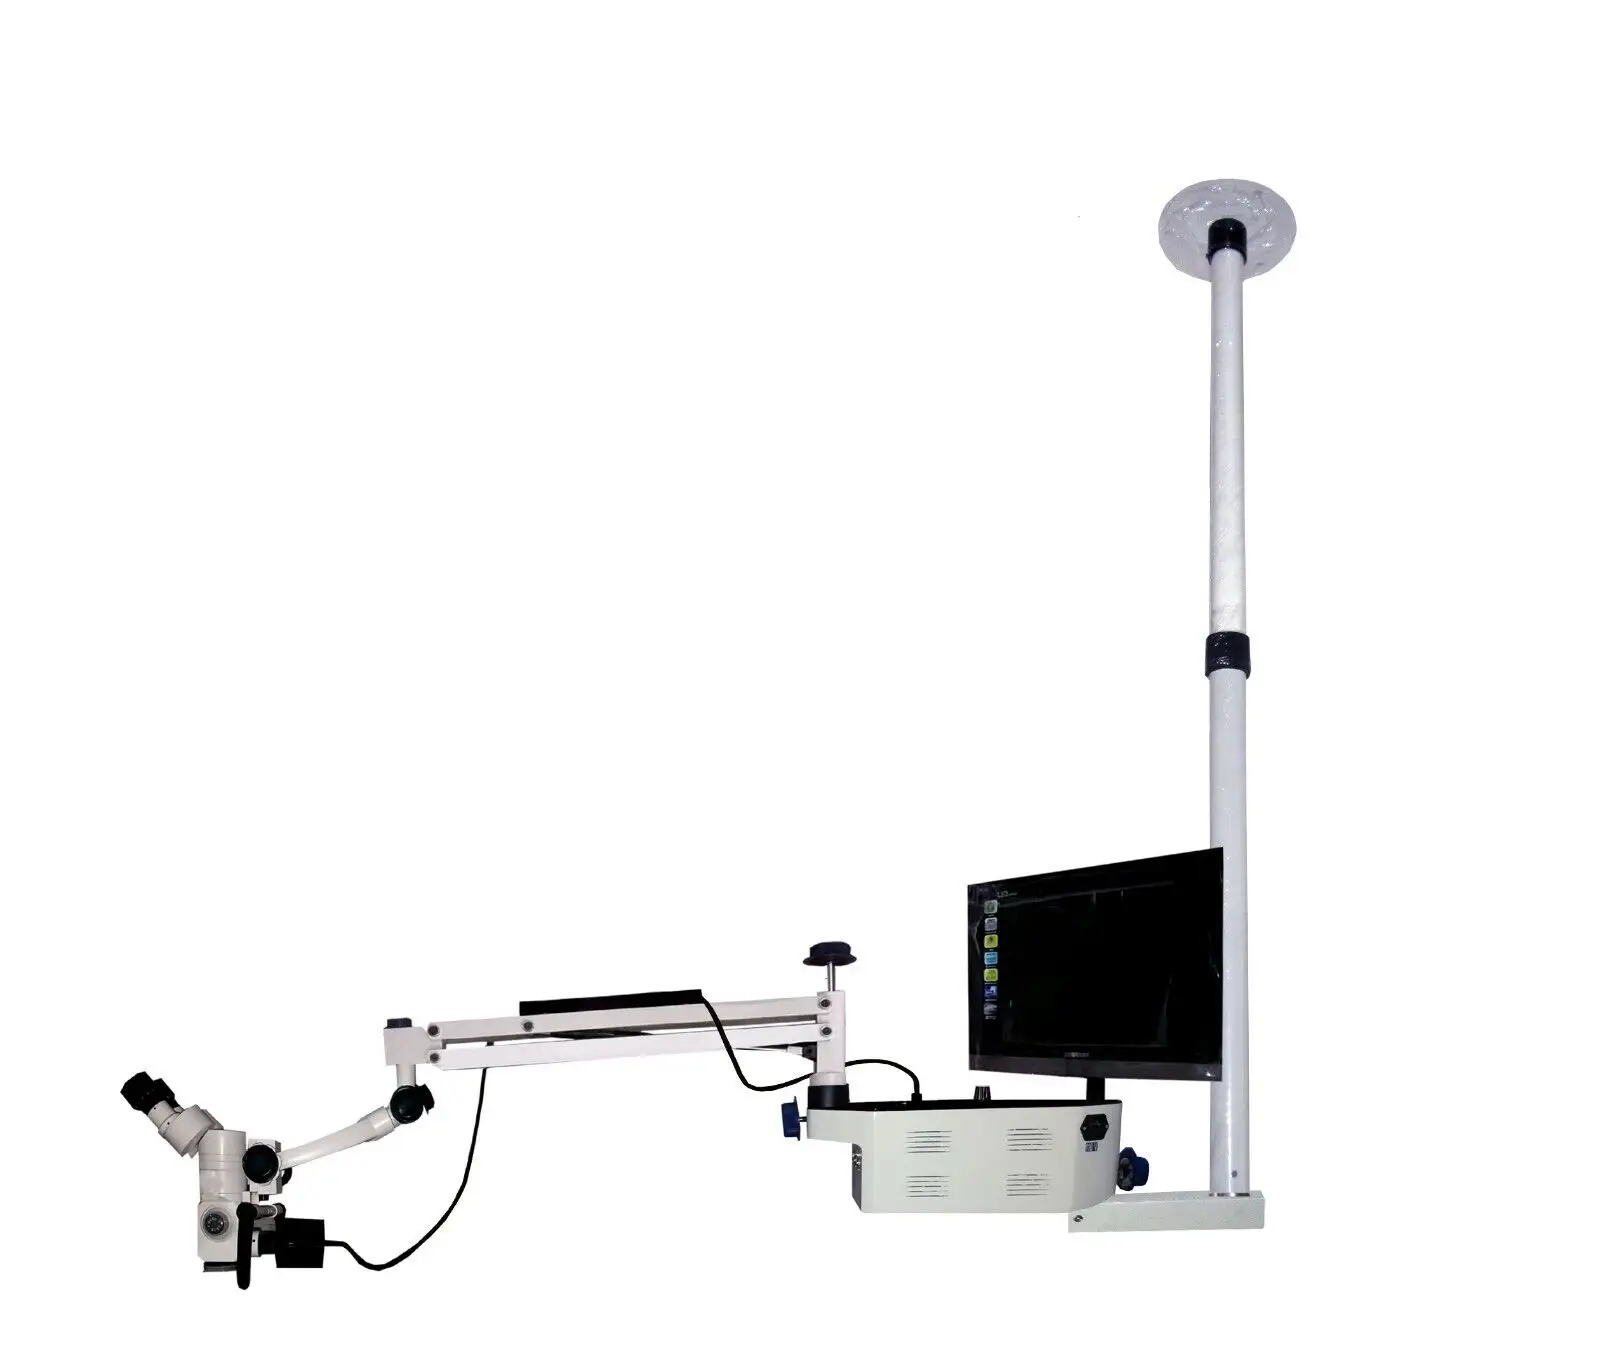 SCIENCE & SURGICAL Manufacture Ceiling Mount Factory price Dental Microscope with LED Light Source for Coaxial Illumination.....